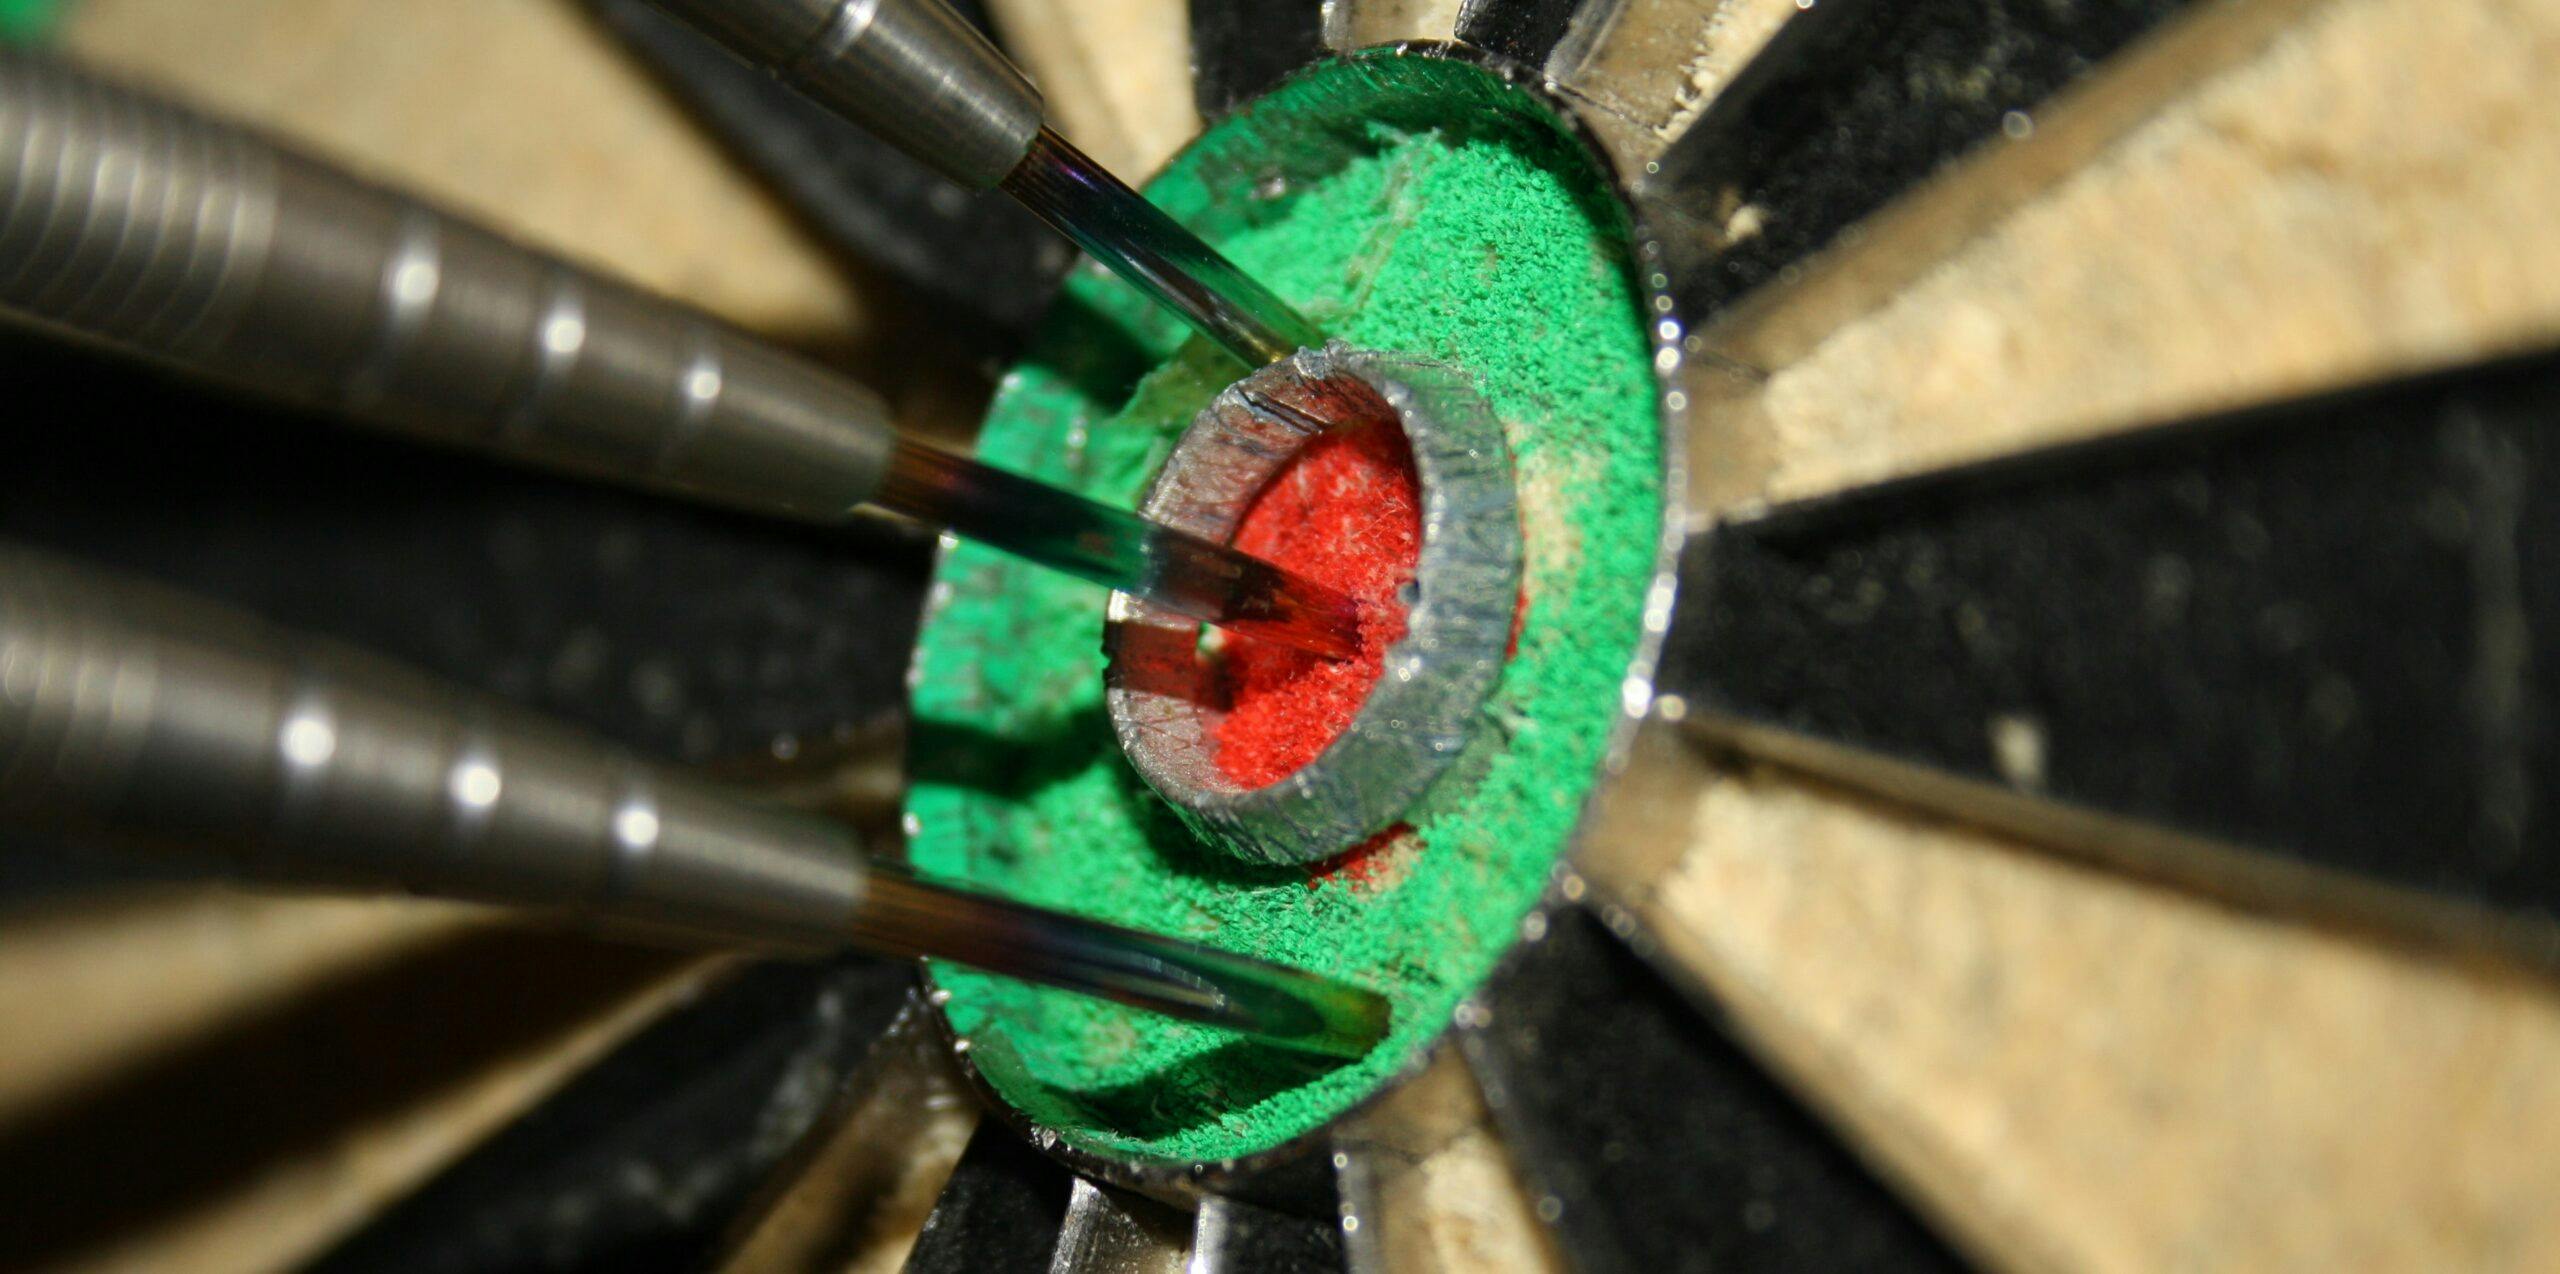 A dart precisely hitting the center of a target, showcasing remarkable accuracy and precision.